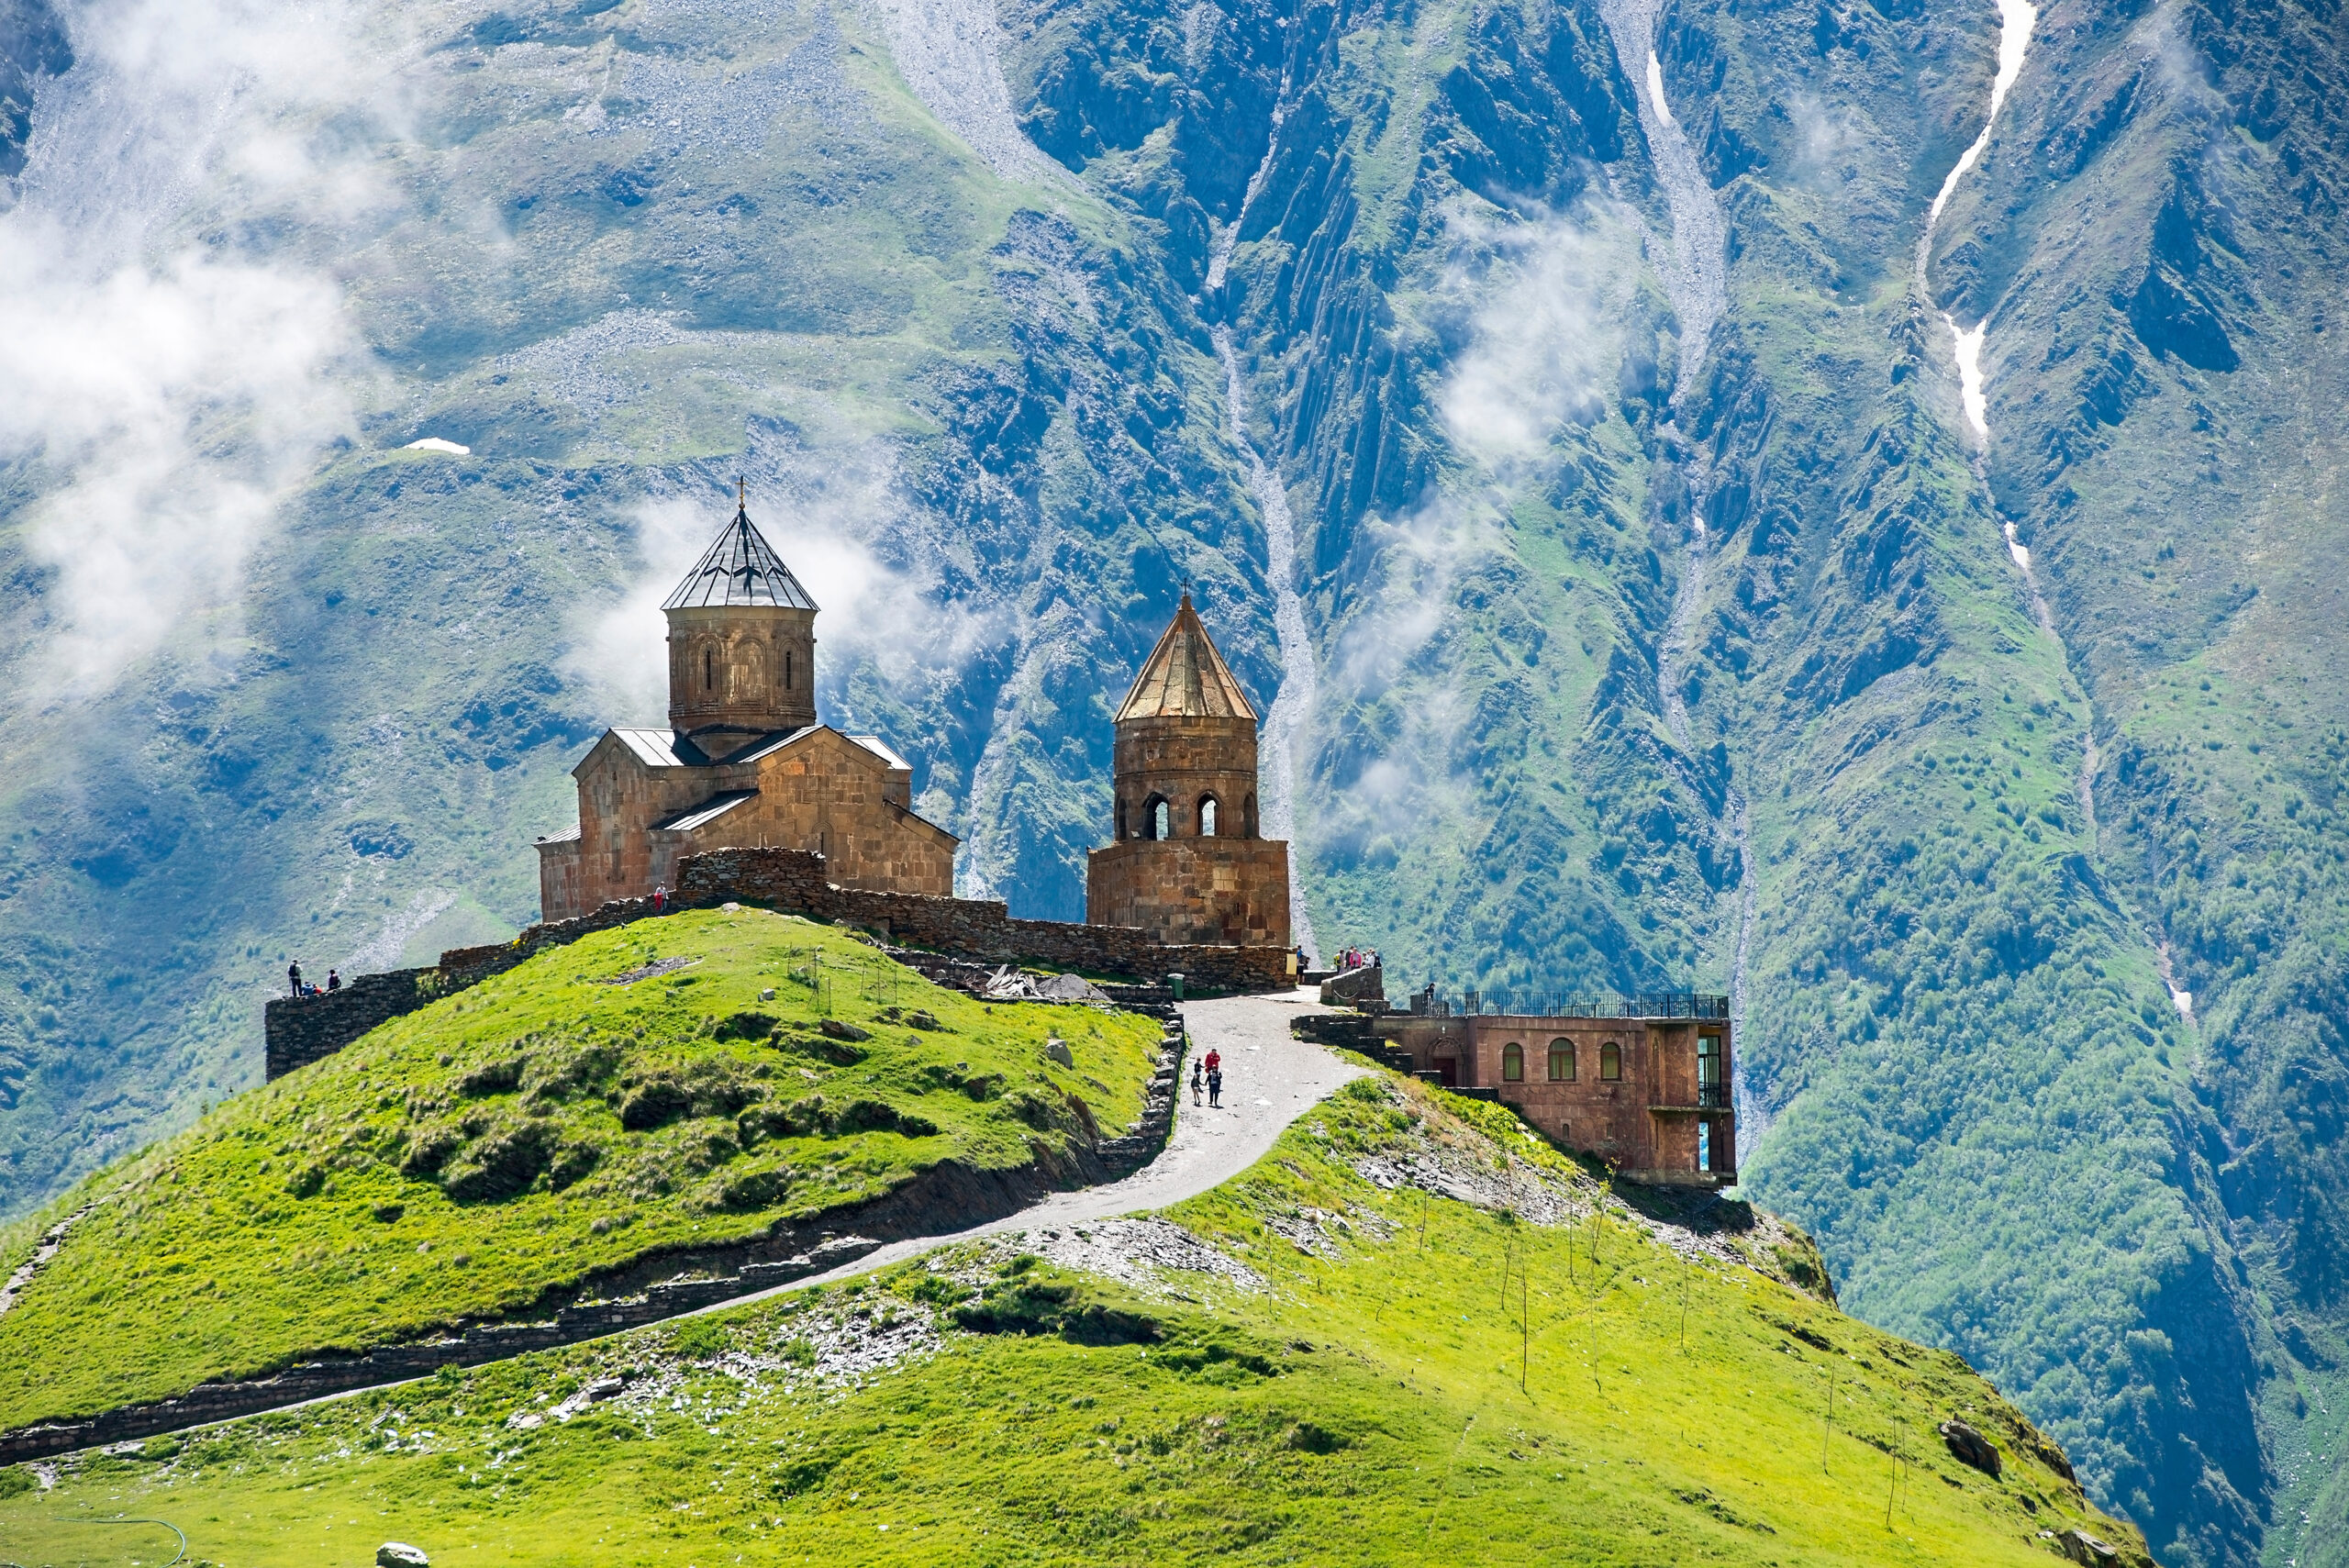 production-services-and-filming-in-georgia-via-swixer-church-in-the-mountains